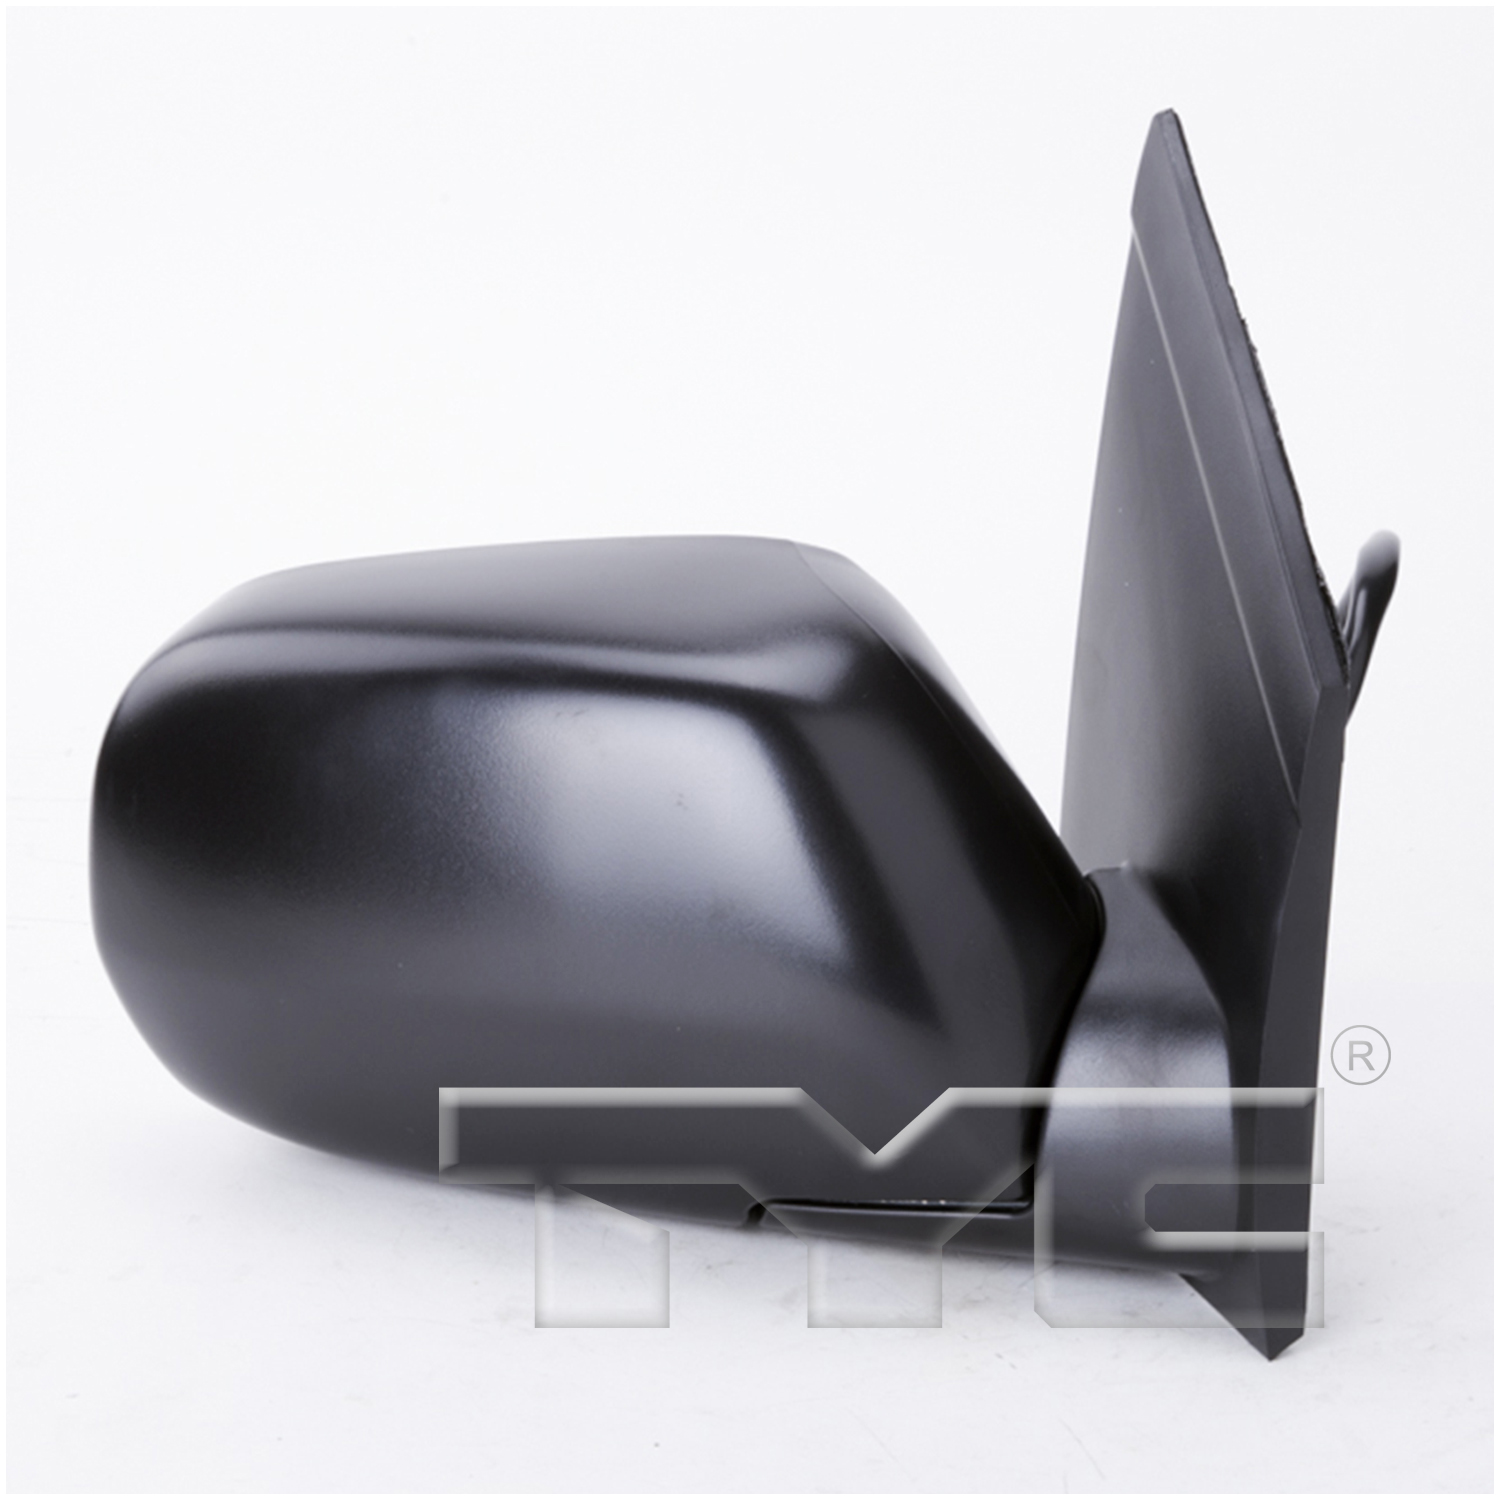 Aftermarket MIRRORS for HONDA - ODYSSEY, ODYSSEY,99-04,RT Mirror outside rear view